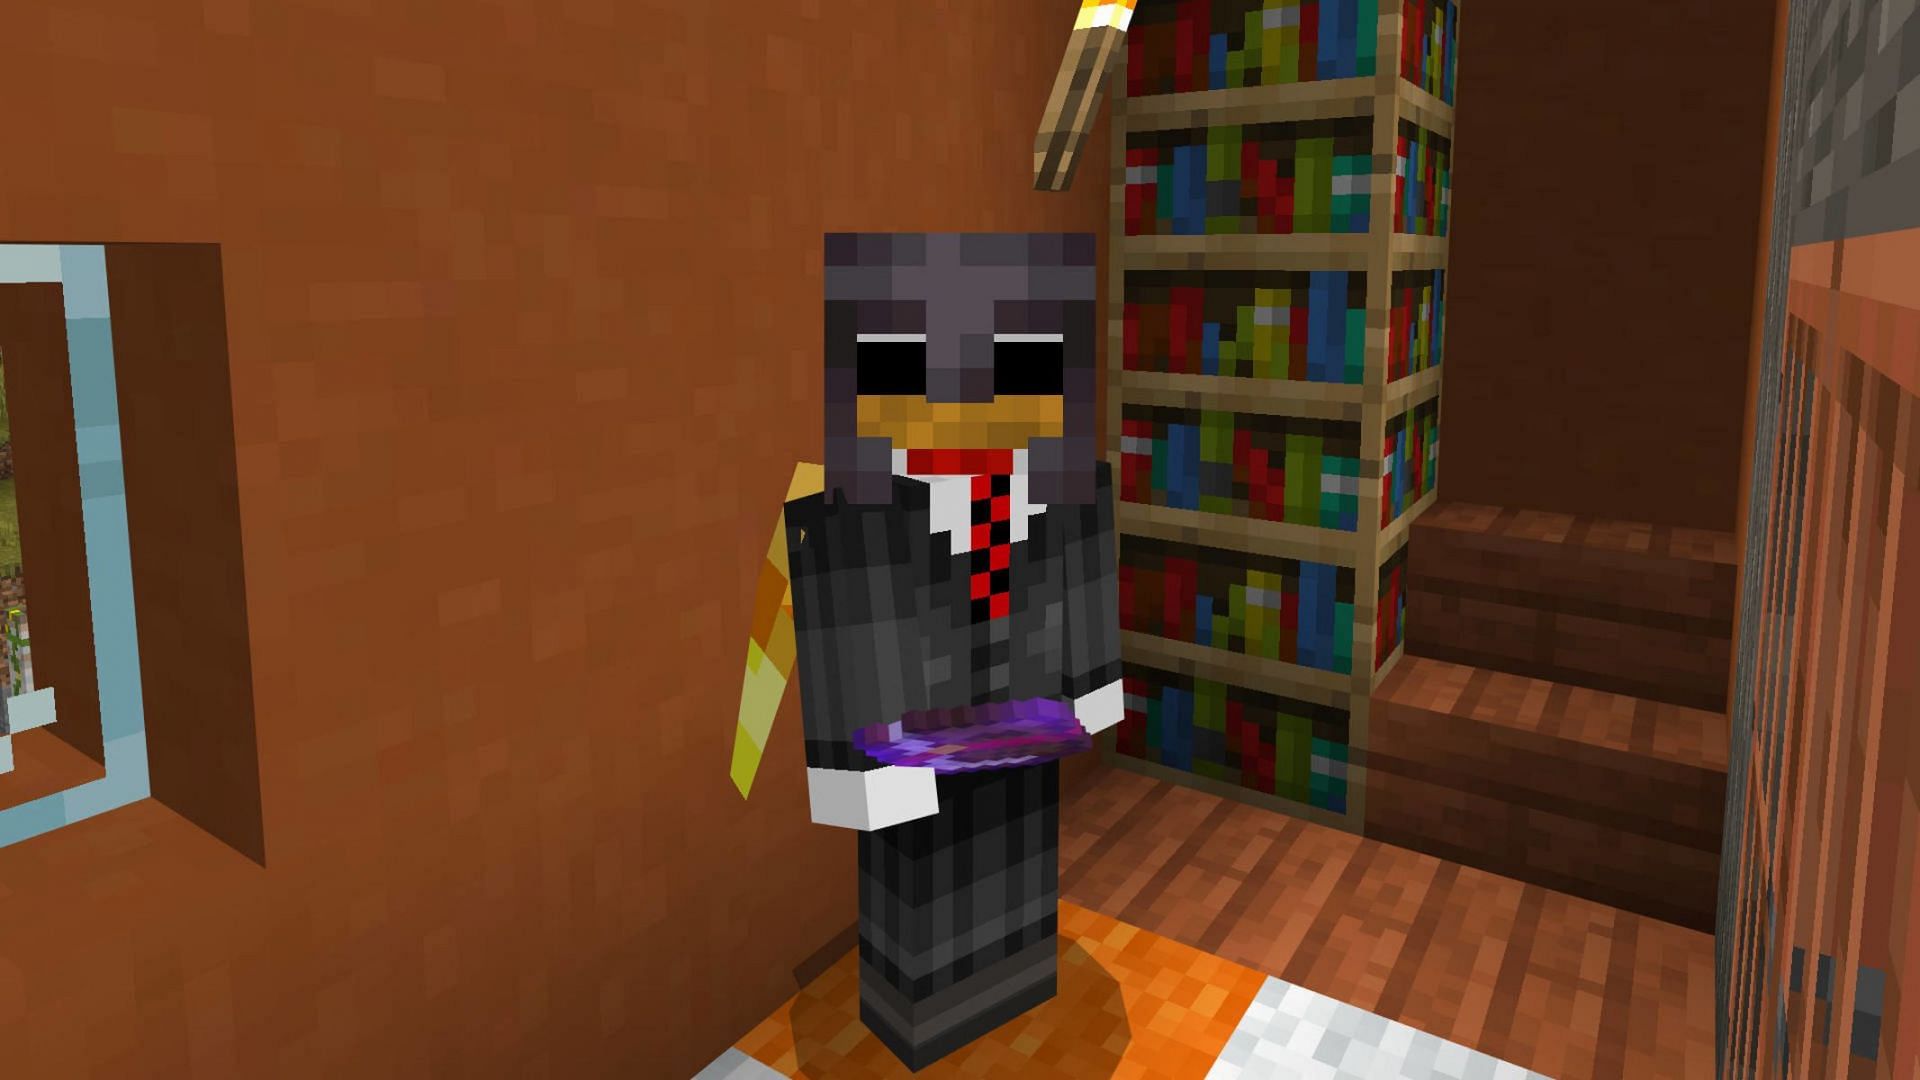 Paper is integral in crafting books and other items in Minecraft (Image via Mojang)